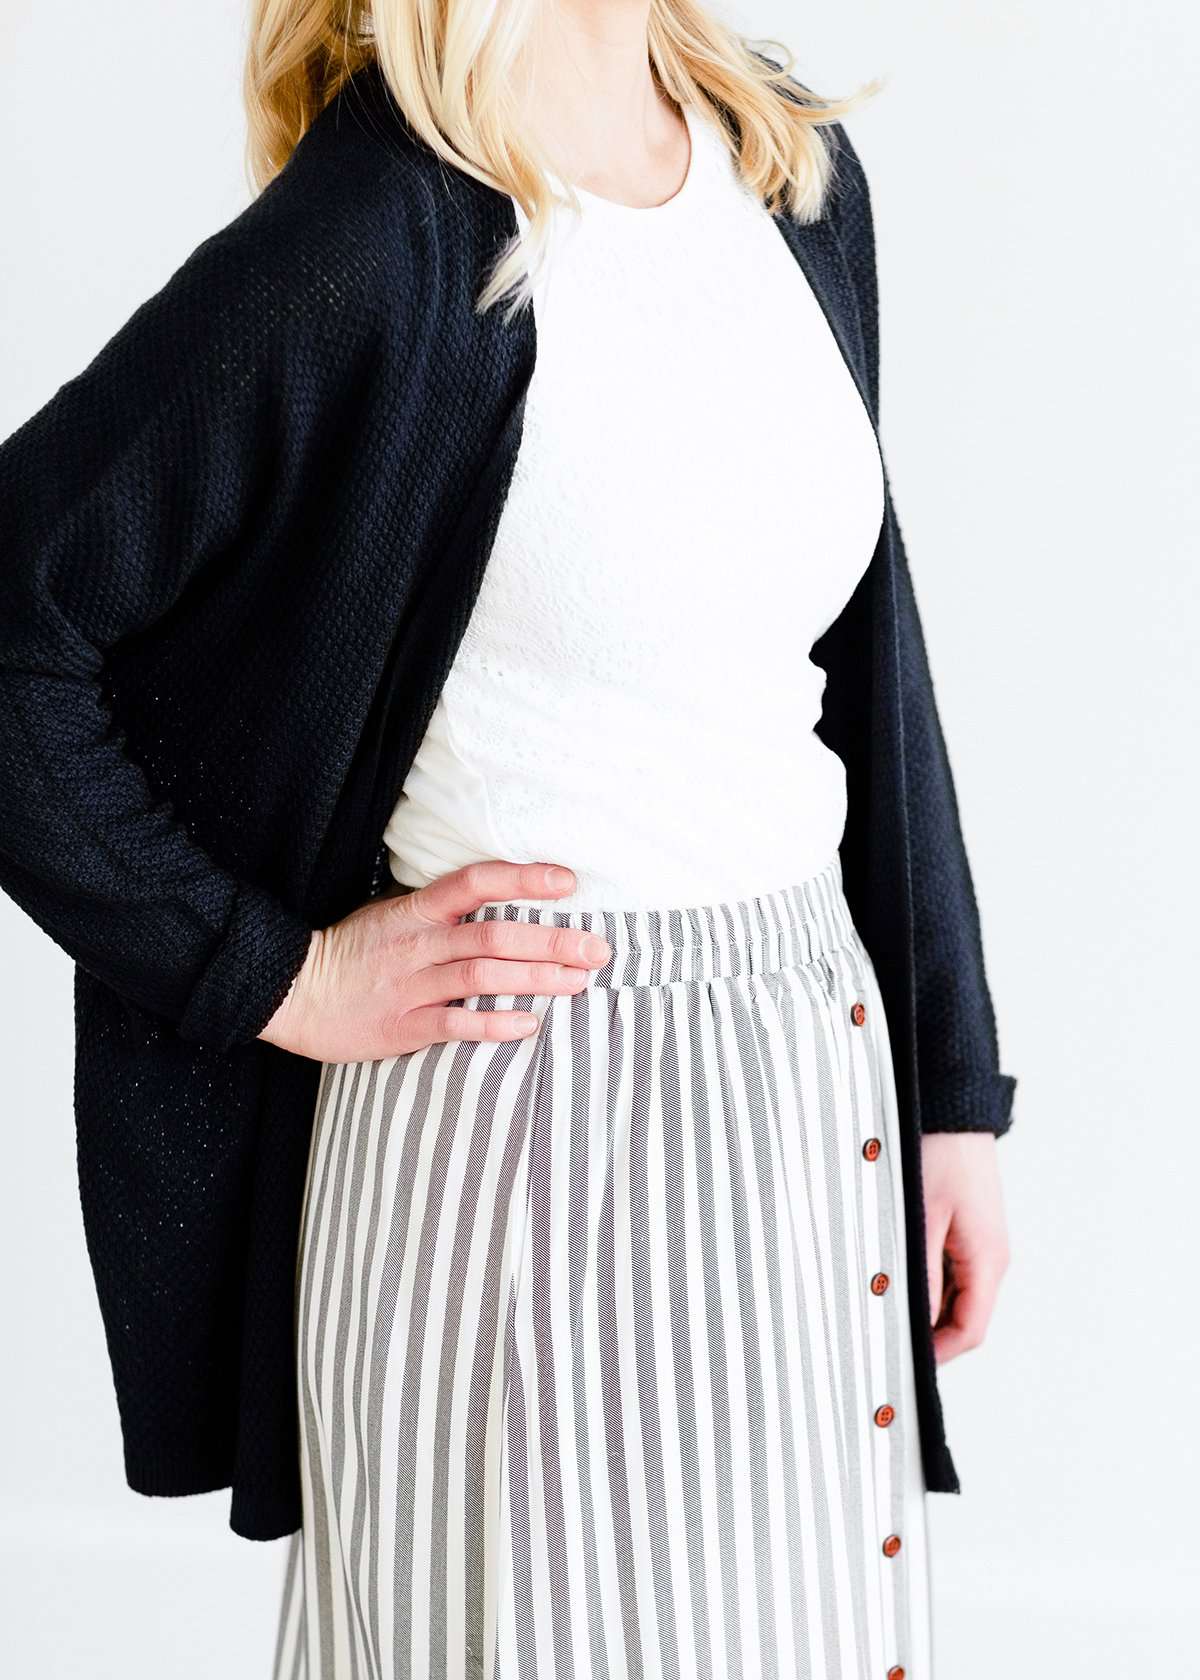 Woman wearing a gray striped skirt with camel colored faux buttons on the front that also has an elastic waistband